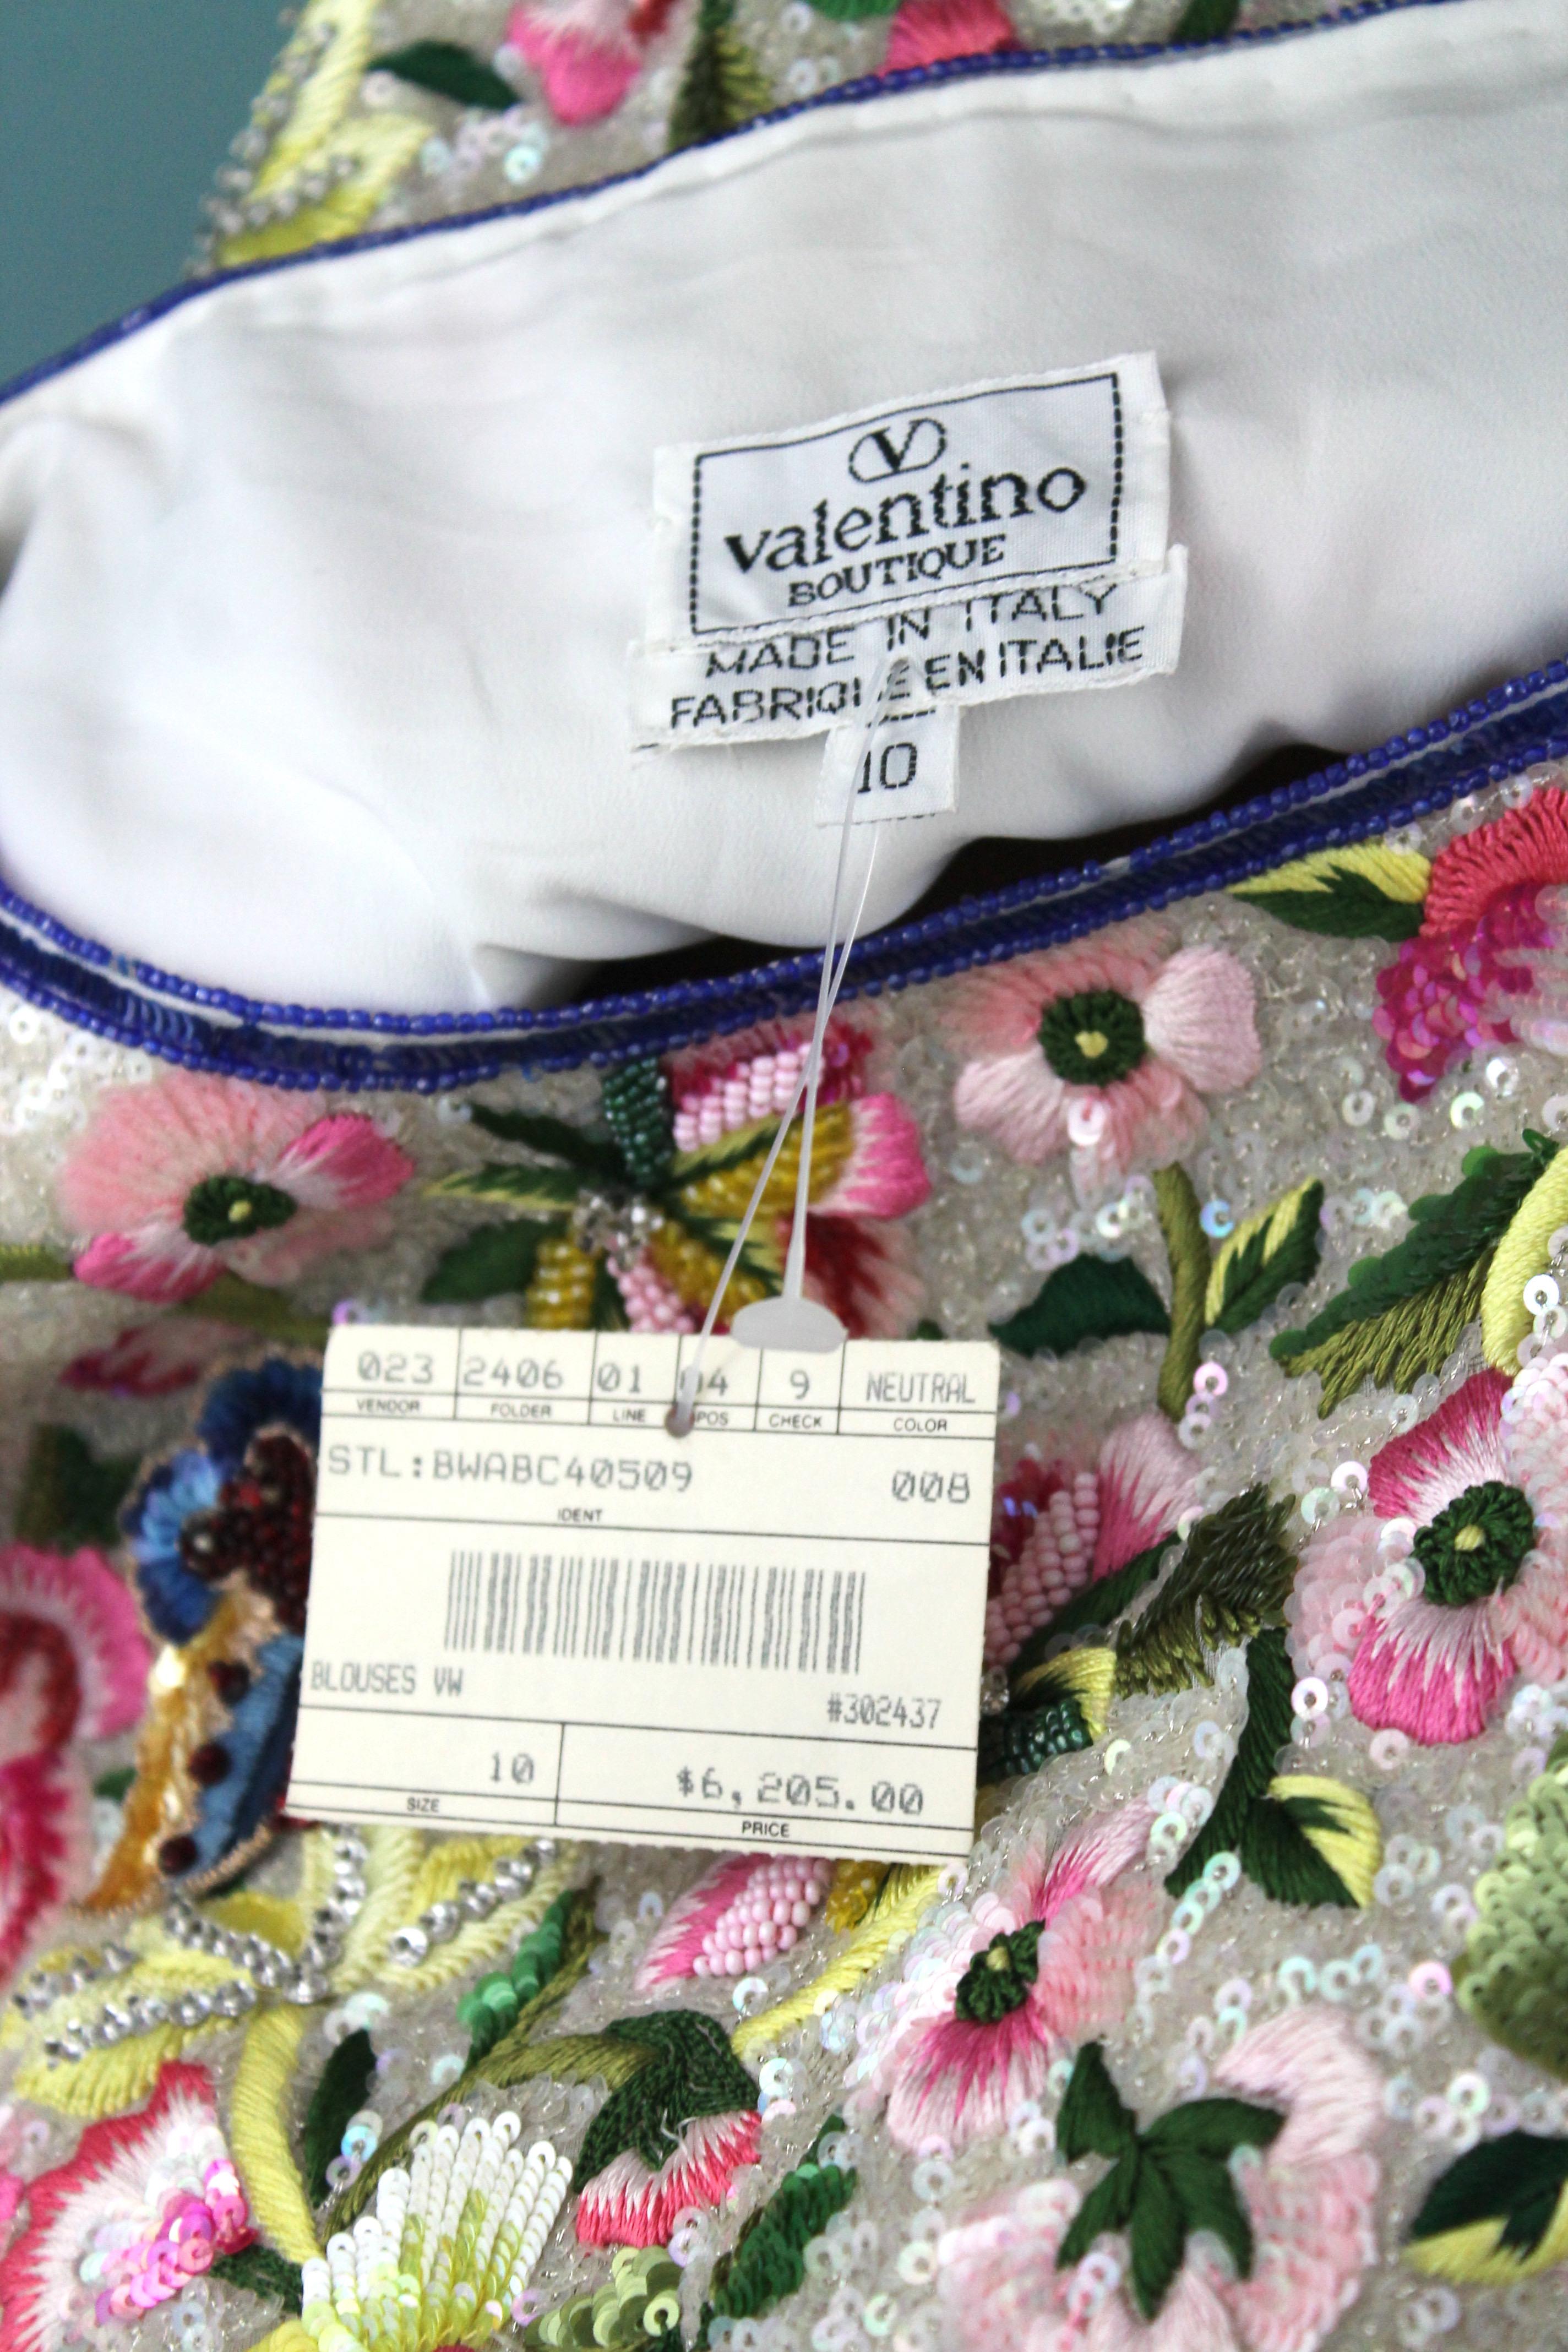 -Whimsical top from Valentino
-Dated to 1980's, new with tags, retailed for $6,200
-Laces up on the left, zips on the right
-Hand beaded 
-Made in Italy 
-Sized 10 US, best fitting a size 4/6 US, Italian 40/42

Approximate Measurements 
-Total